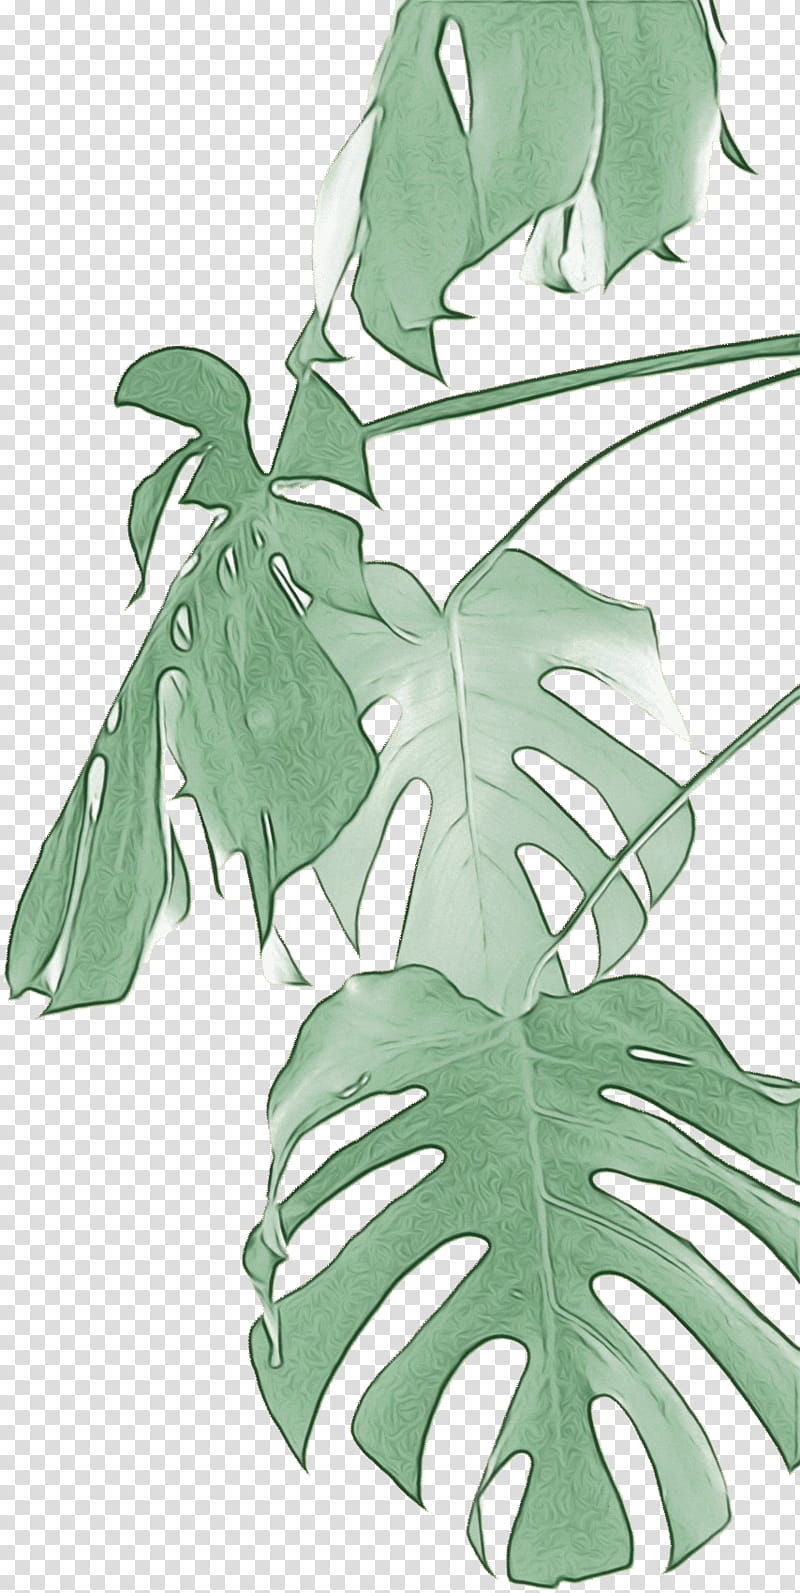 Family Tree, Swiss Cheese Plant, Vine, Houseplant, Plants, Philodendron, Leaf, Grapevines transparent background PNG clipart